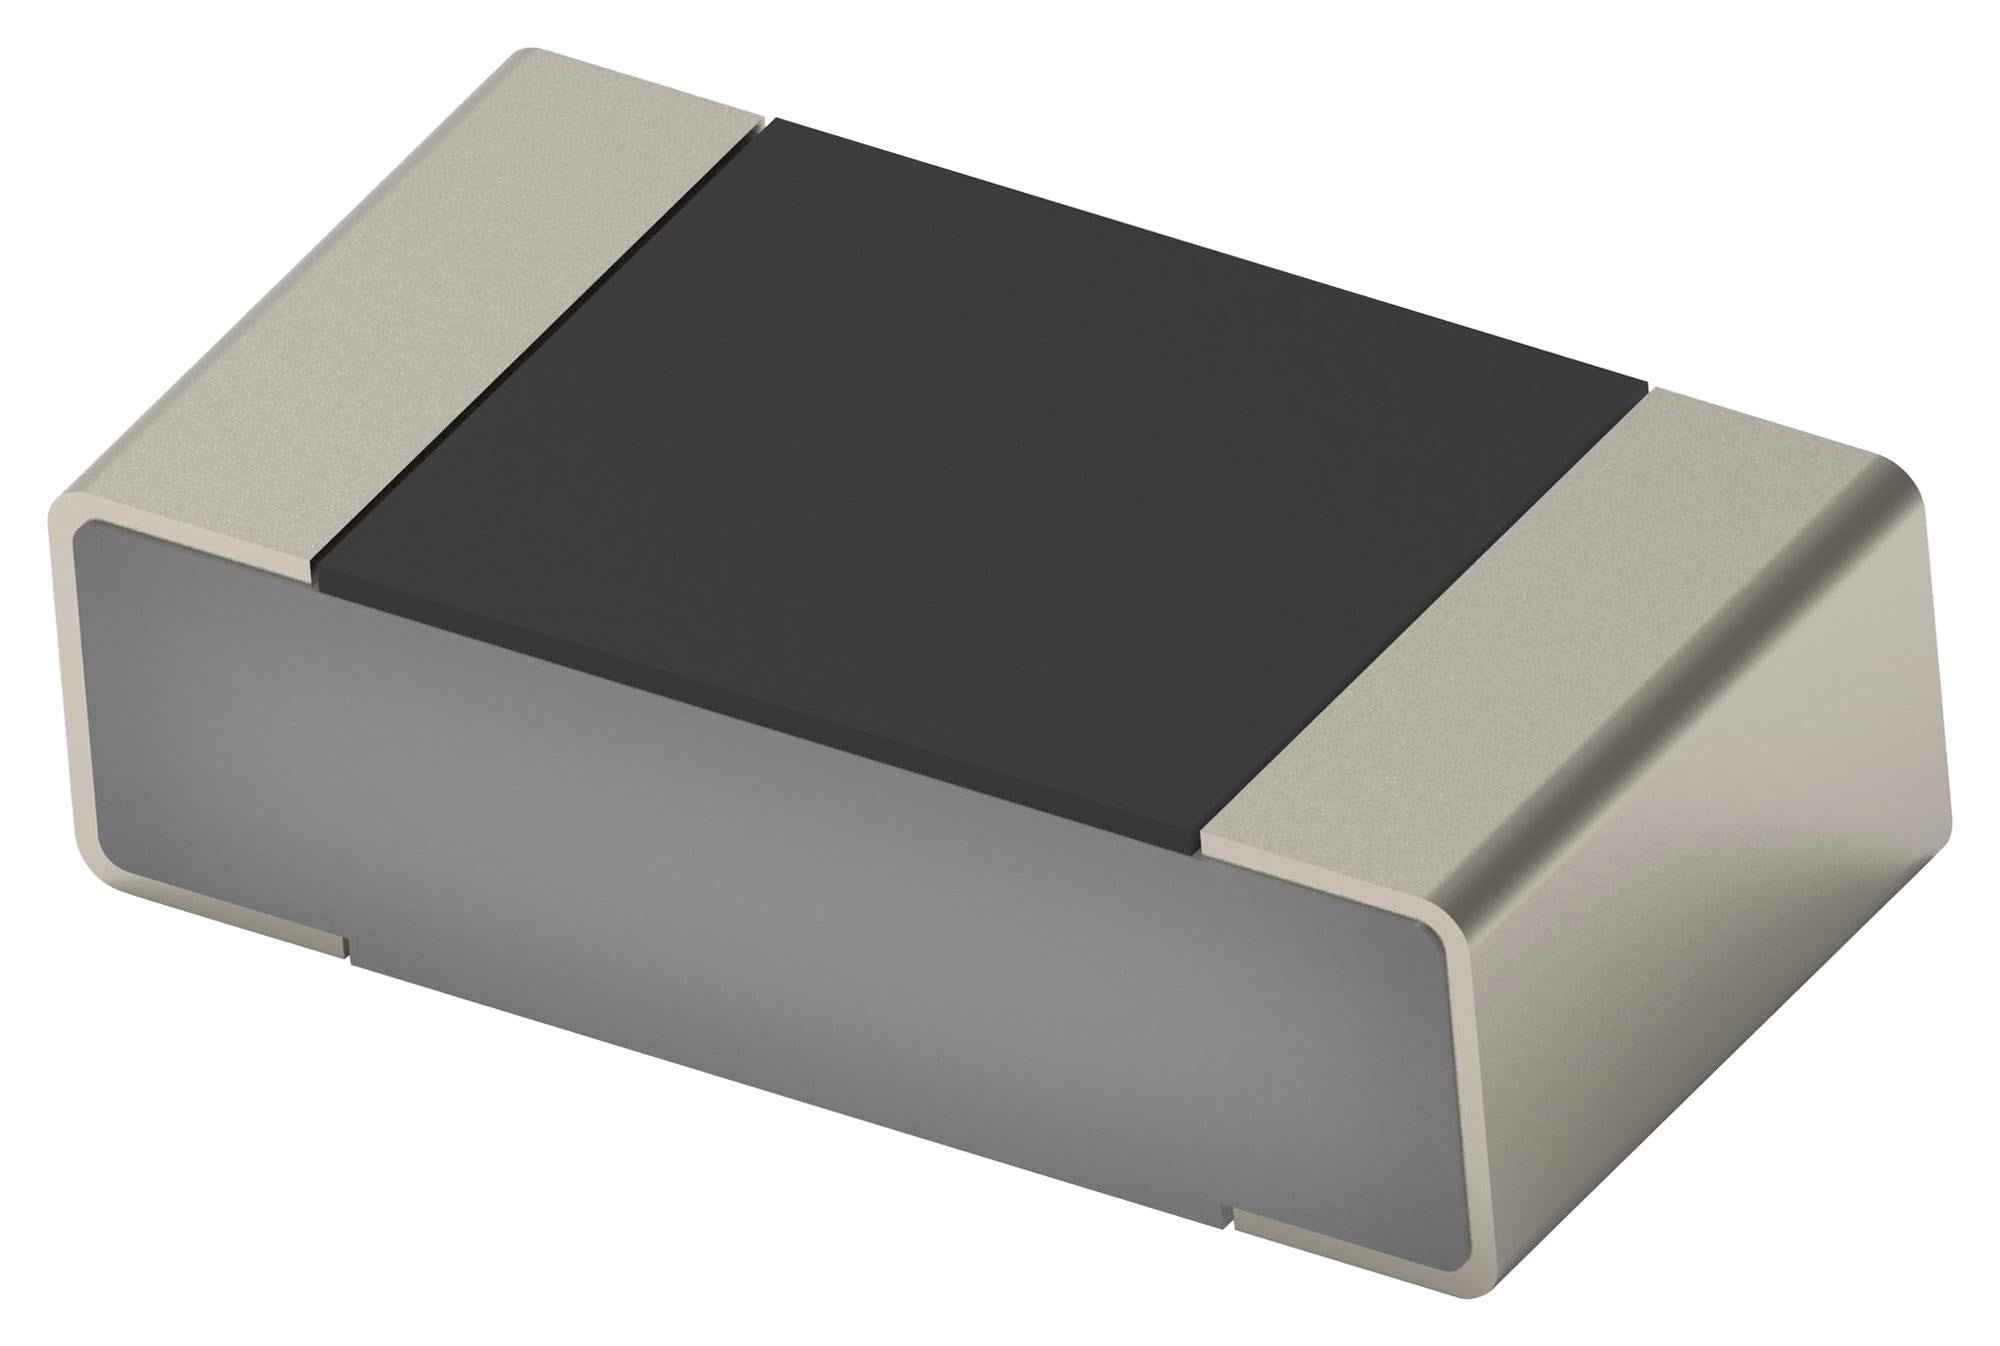 TLRP2B10WR040FTD RES, 0R04, 1W, 1206, METAL STRIP CGS - TE CONNECTIVITY